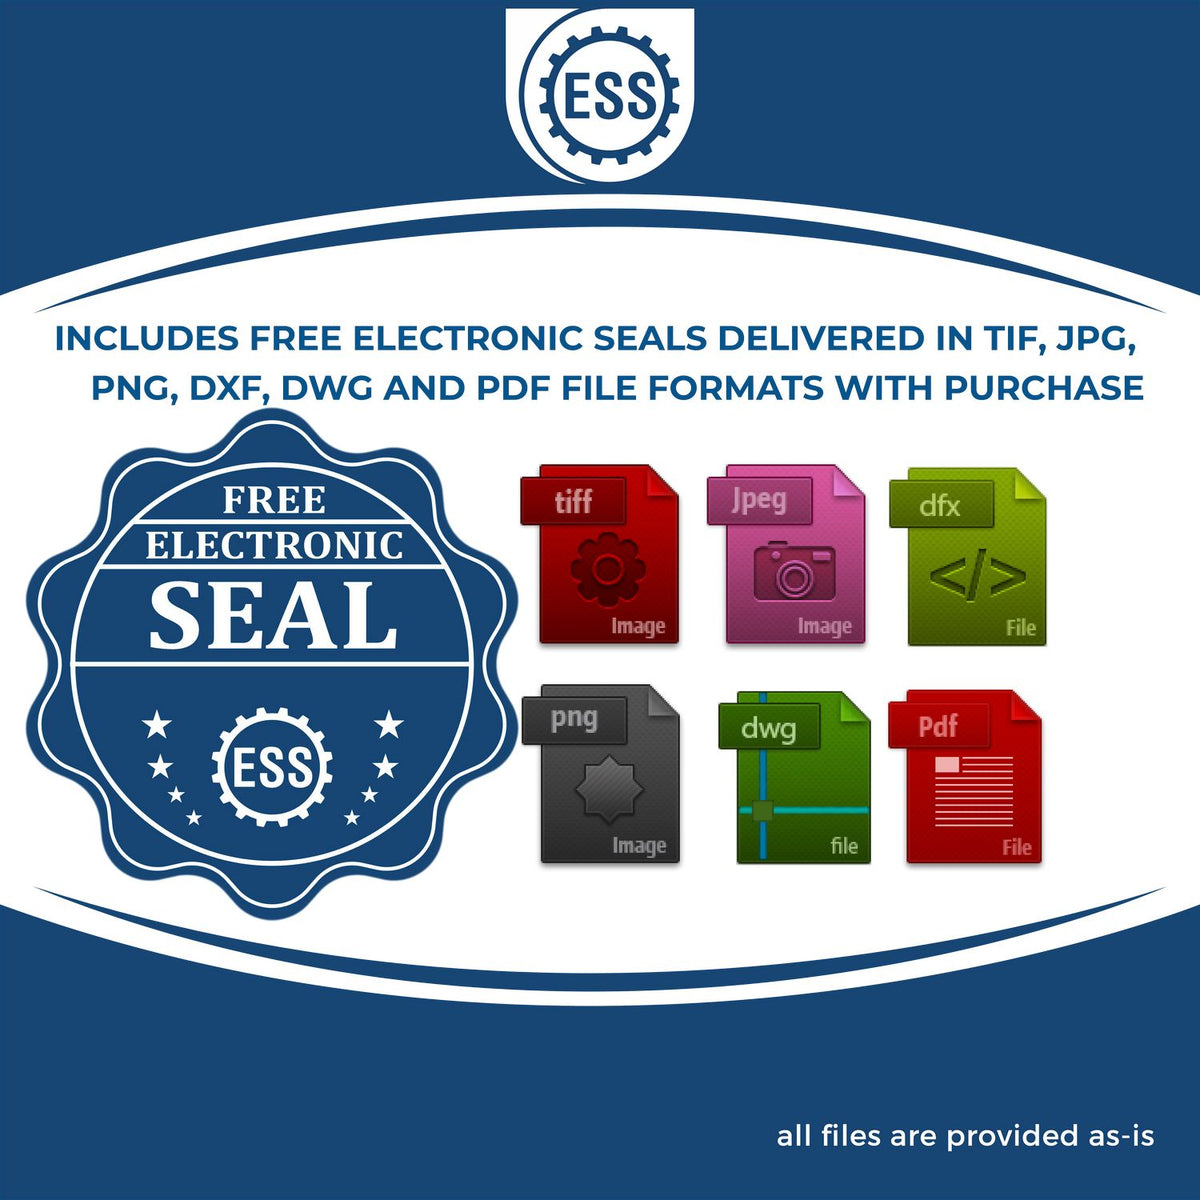 An infographic for the free electronic seal for the Heavy Duty Cast Iron Pennsylvania Engineer Seal Embosser illustrating the different file type icons such as DXF, DWG, TIF, JPG and PNG.